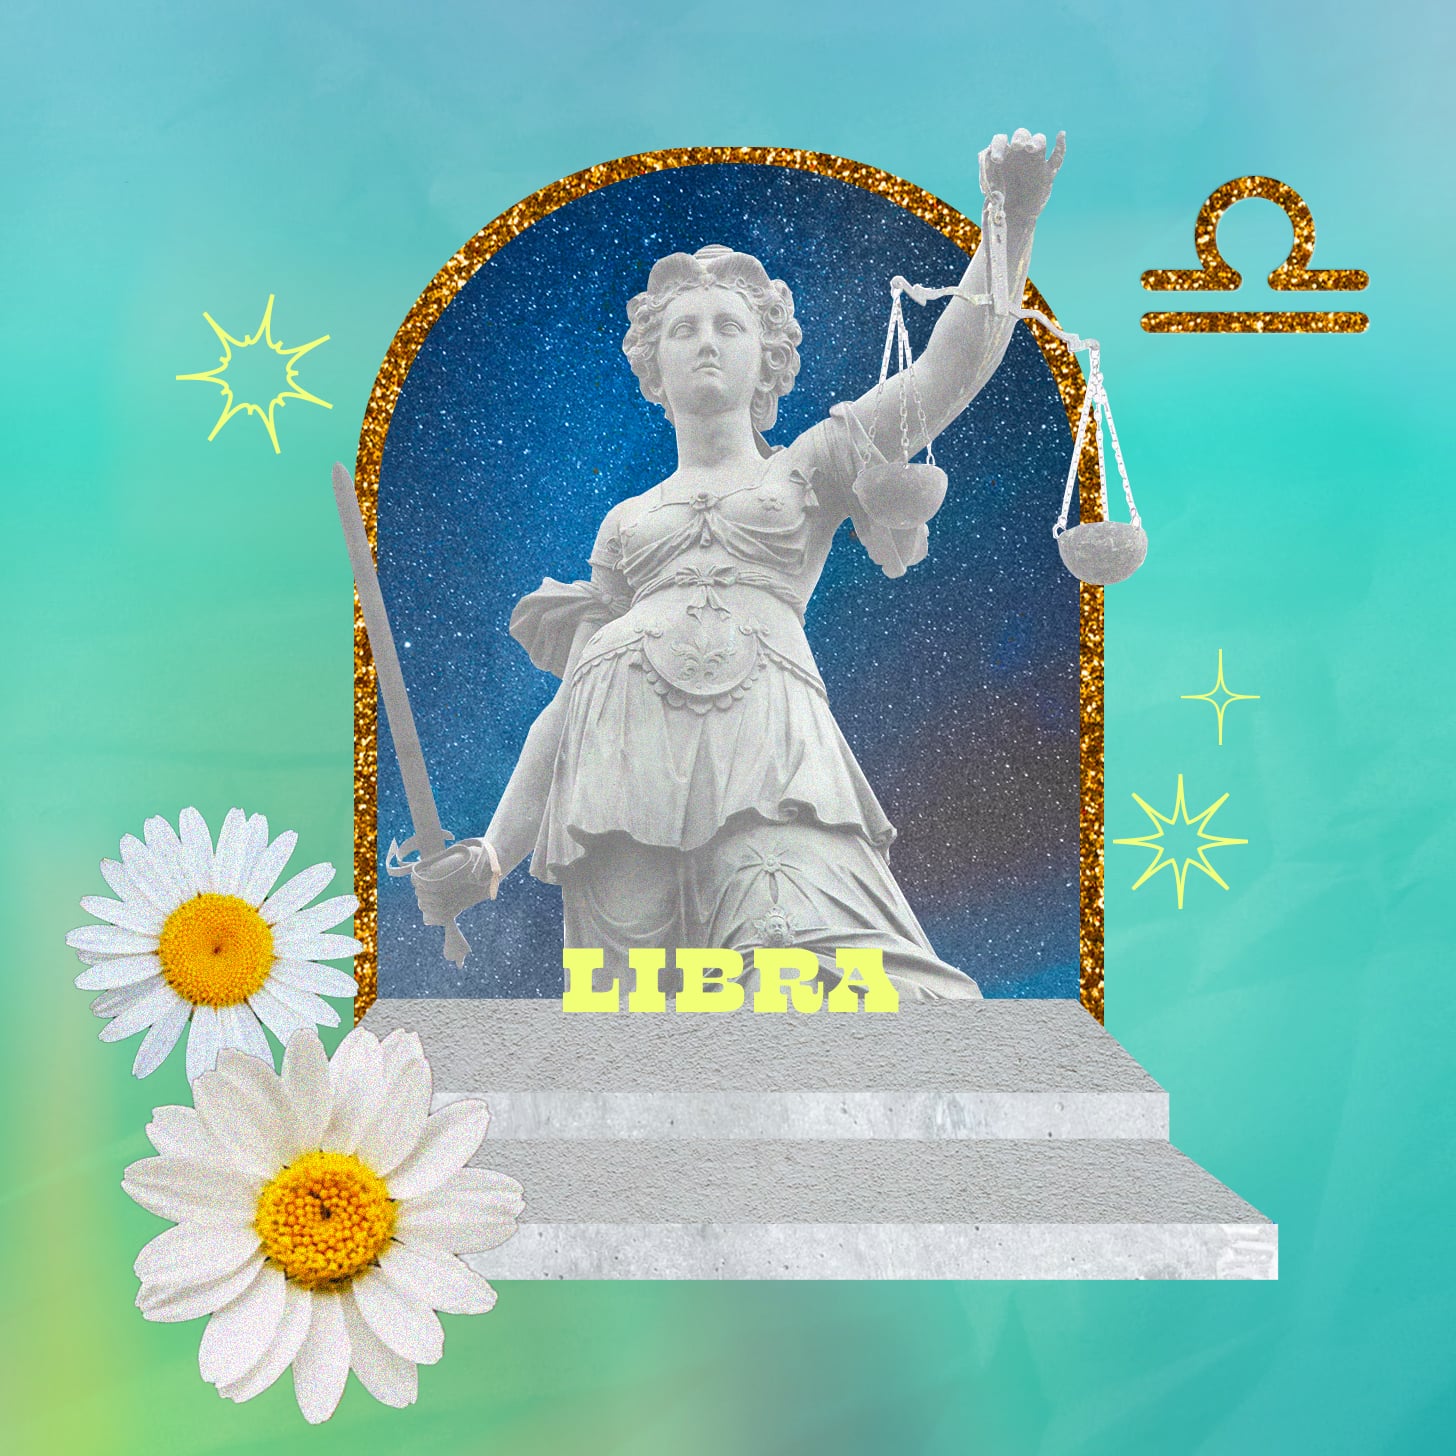 Libra weekly horoscope for August 7-13, 2022